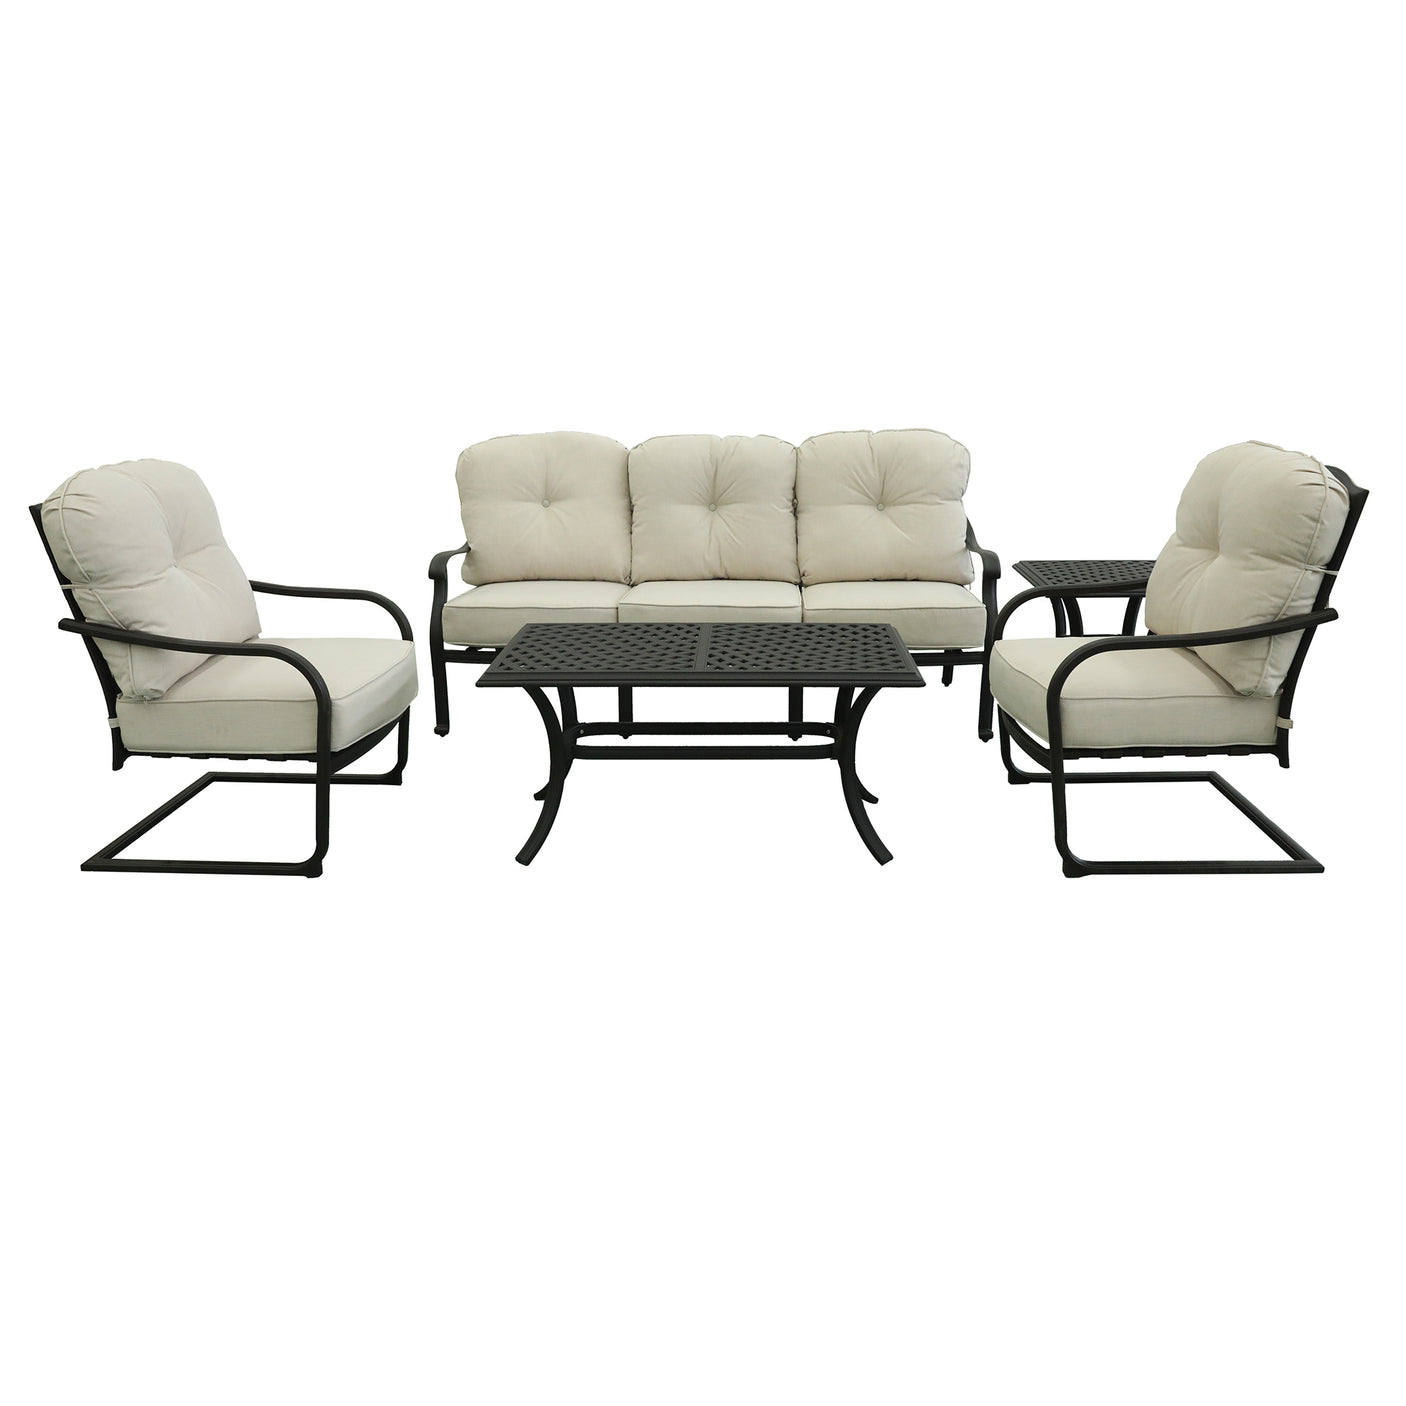 5 Piece Sofa Seating Group with Cushions, Canvas Natural